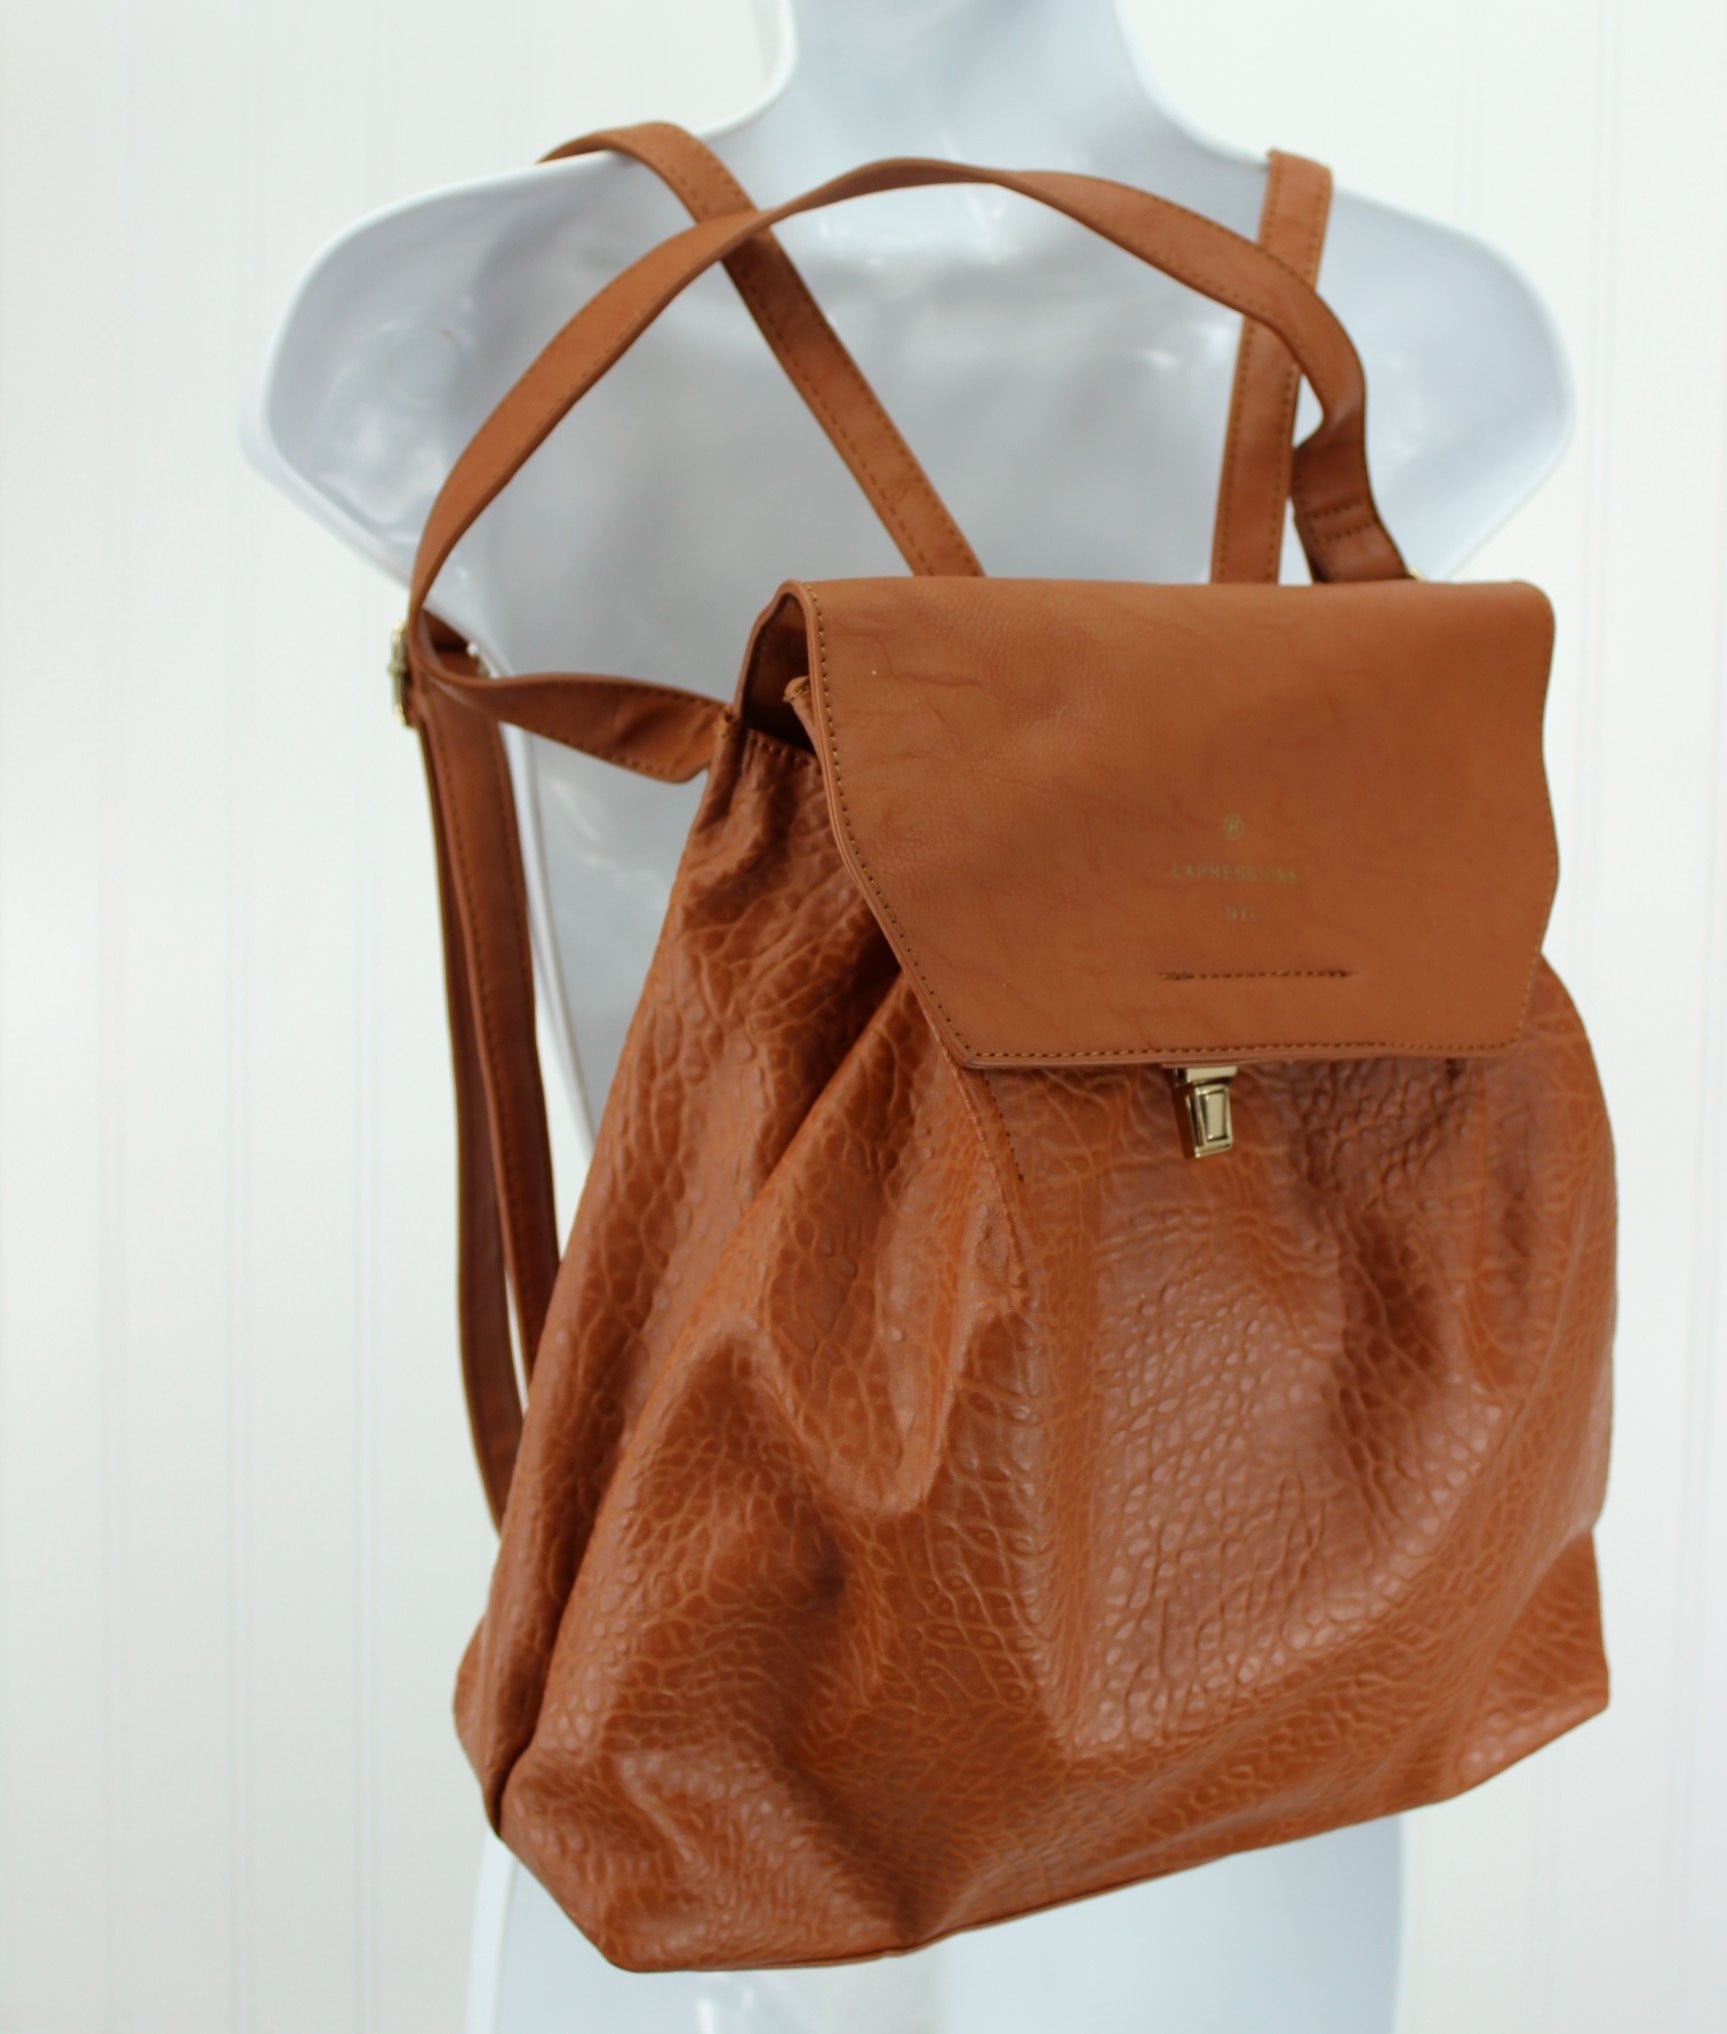 Expressions NYC Shoulder Bag Backpack Caramel Textured Faux  Leather Appears Unused comfortble back pack